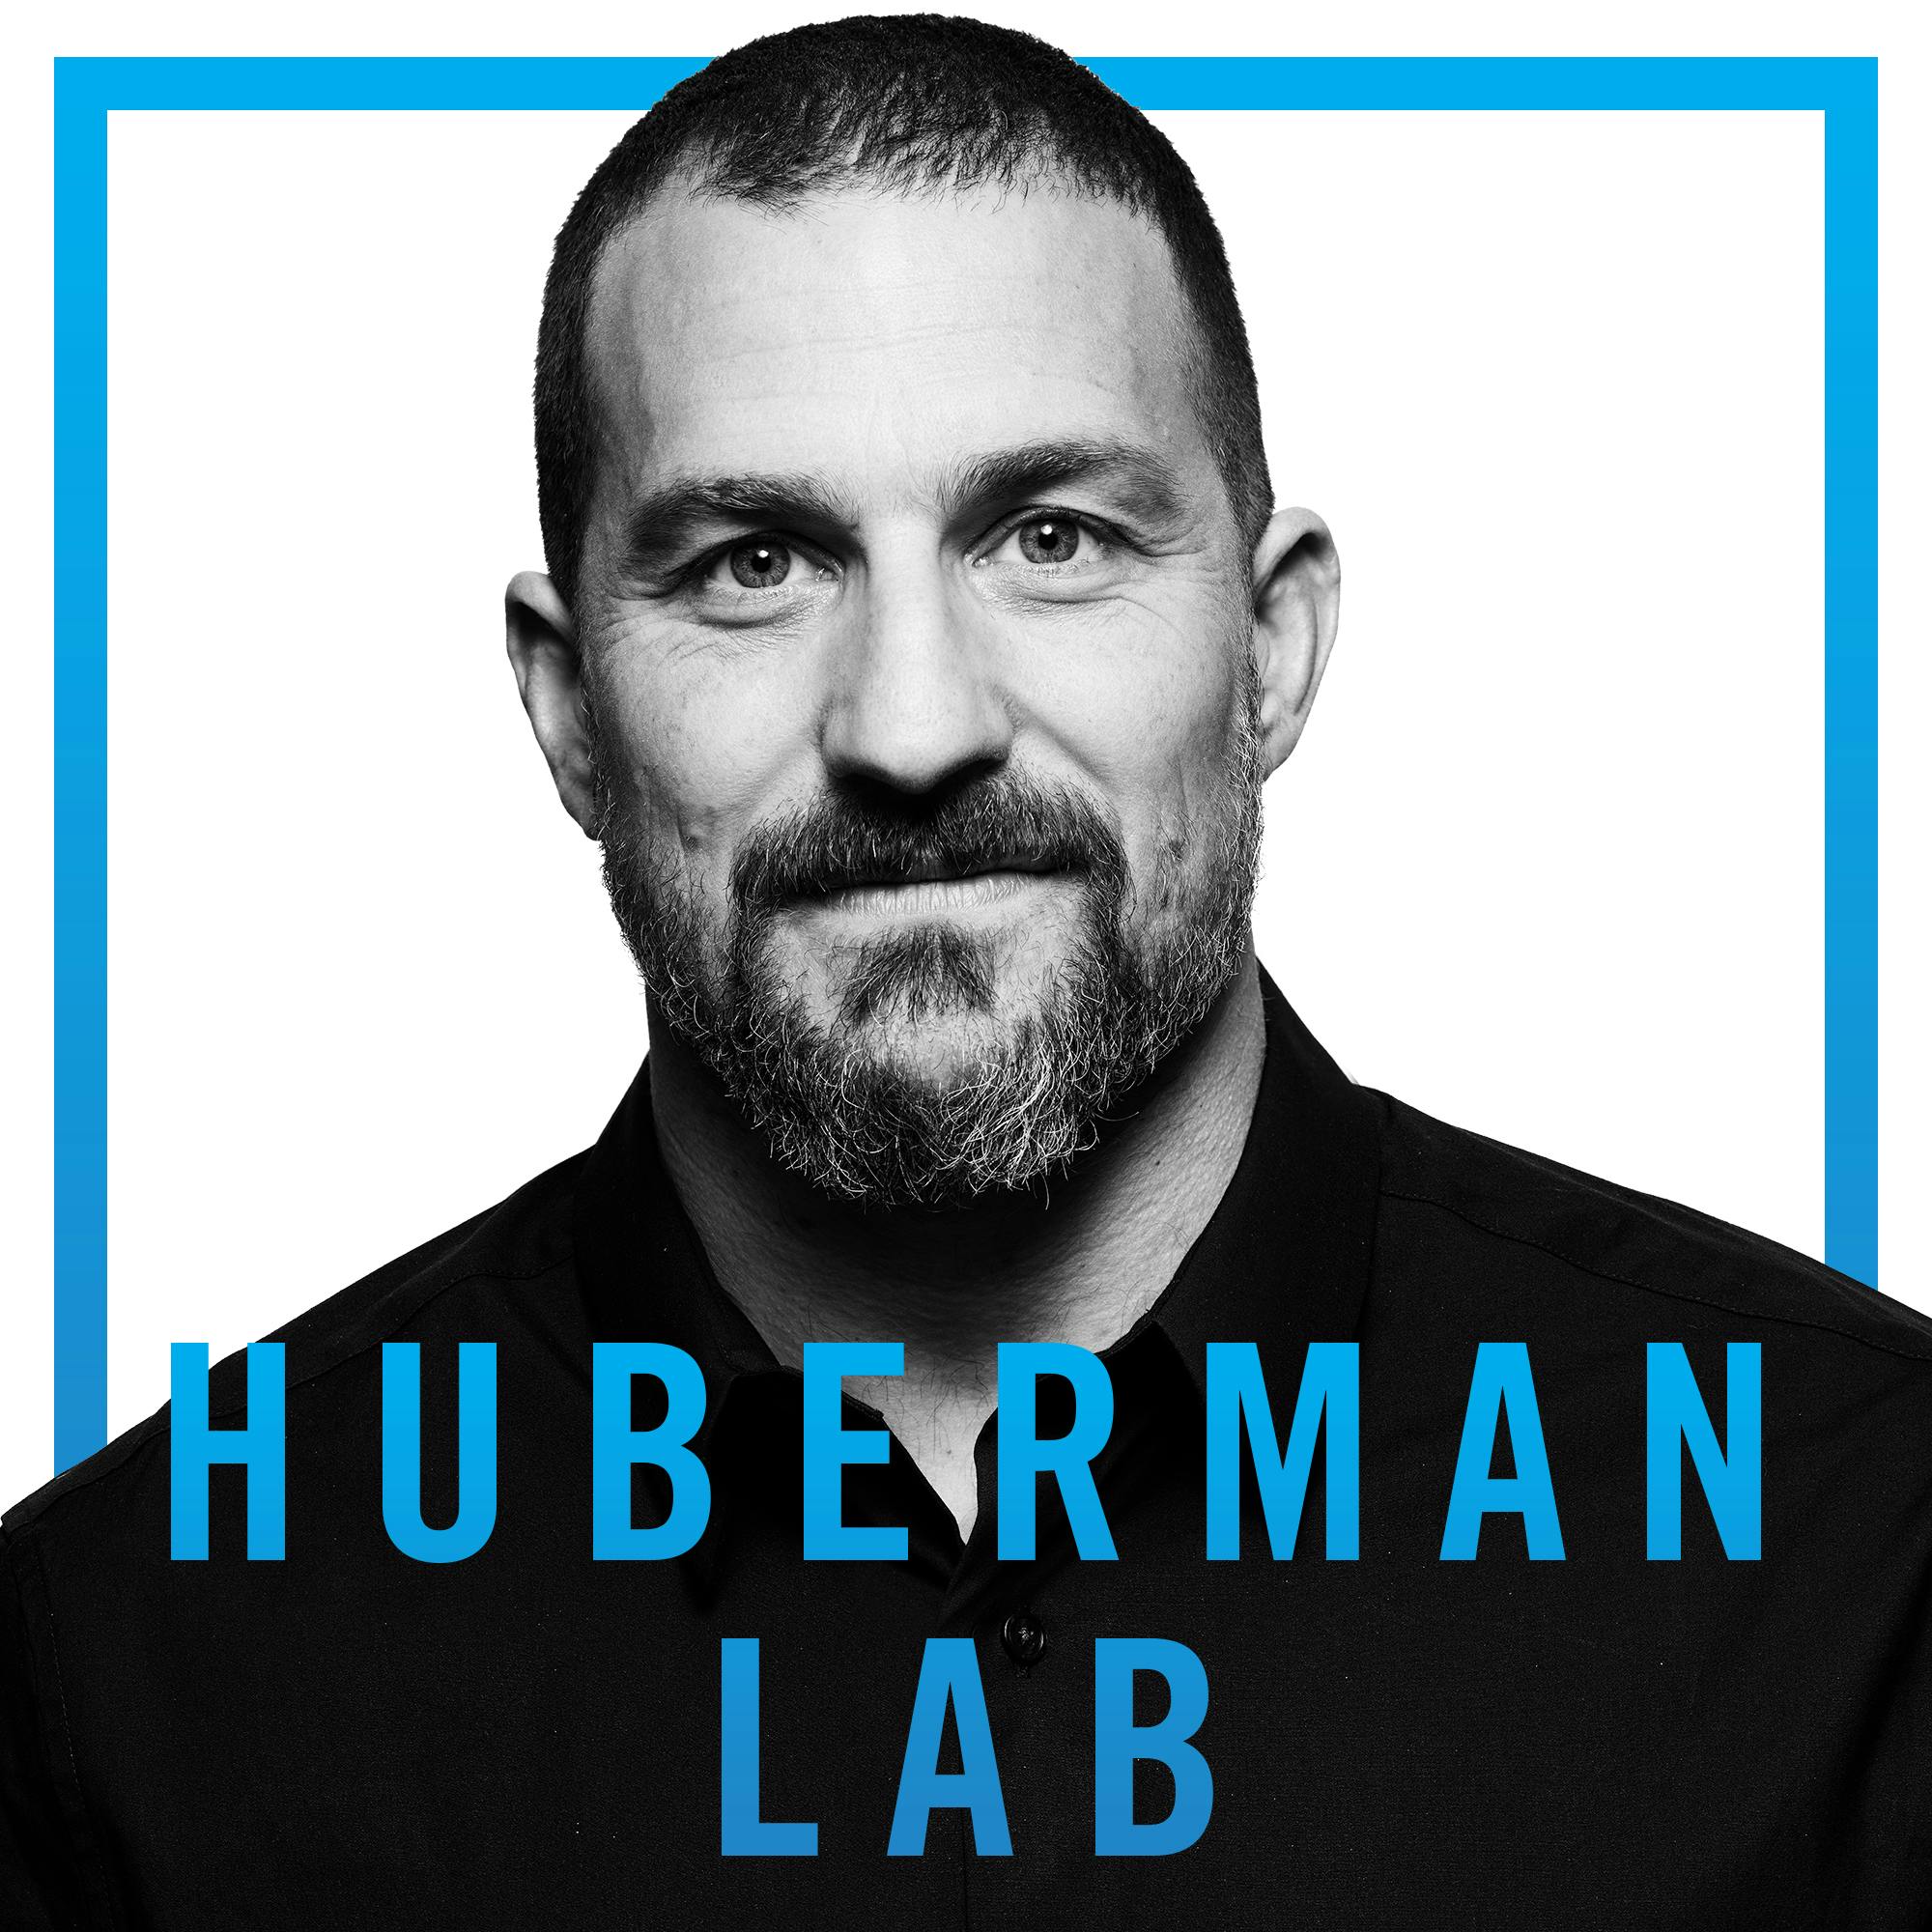 Welcome to the Huberman Lab Podcast